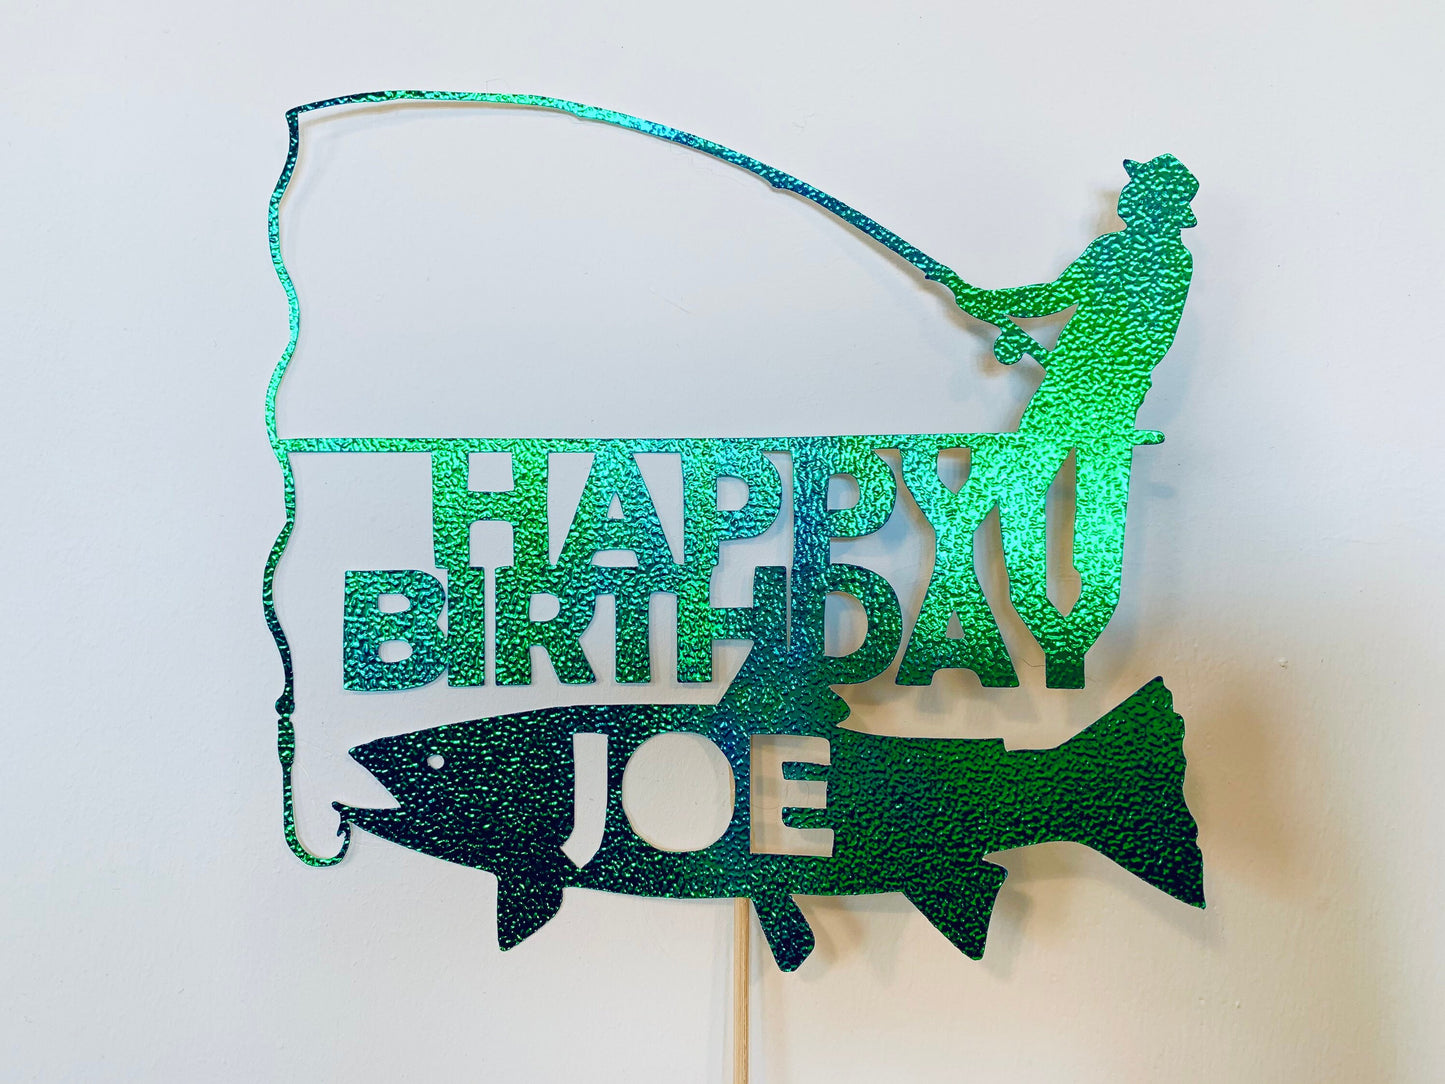 Fishing Happy Birthday cake topper digital cut file suitable for Cricut or Silhouette, svg, jpeg, png, pdf - Resplendent Aurora